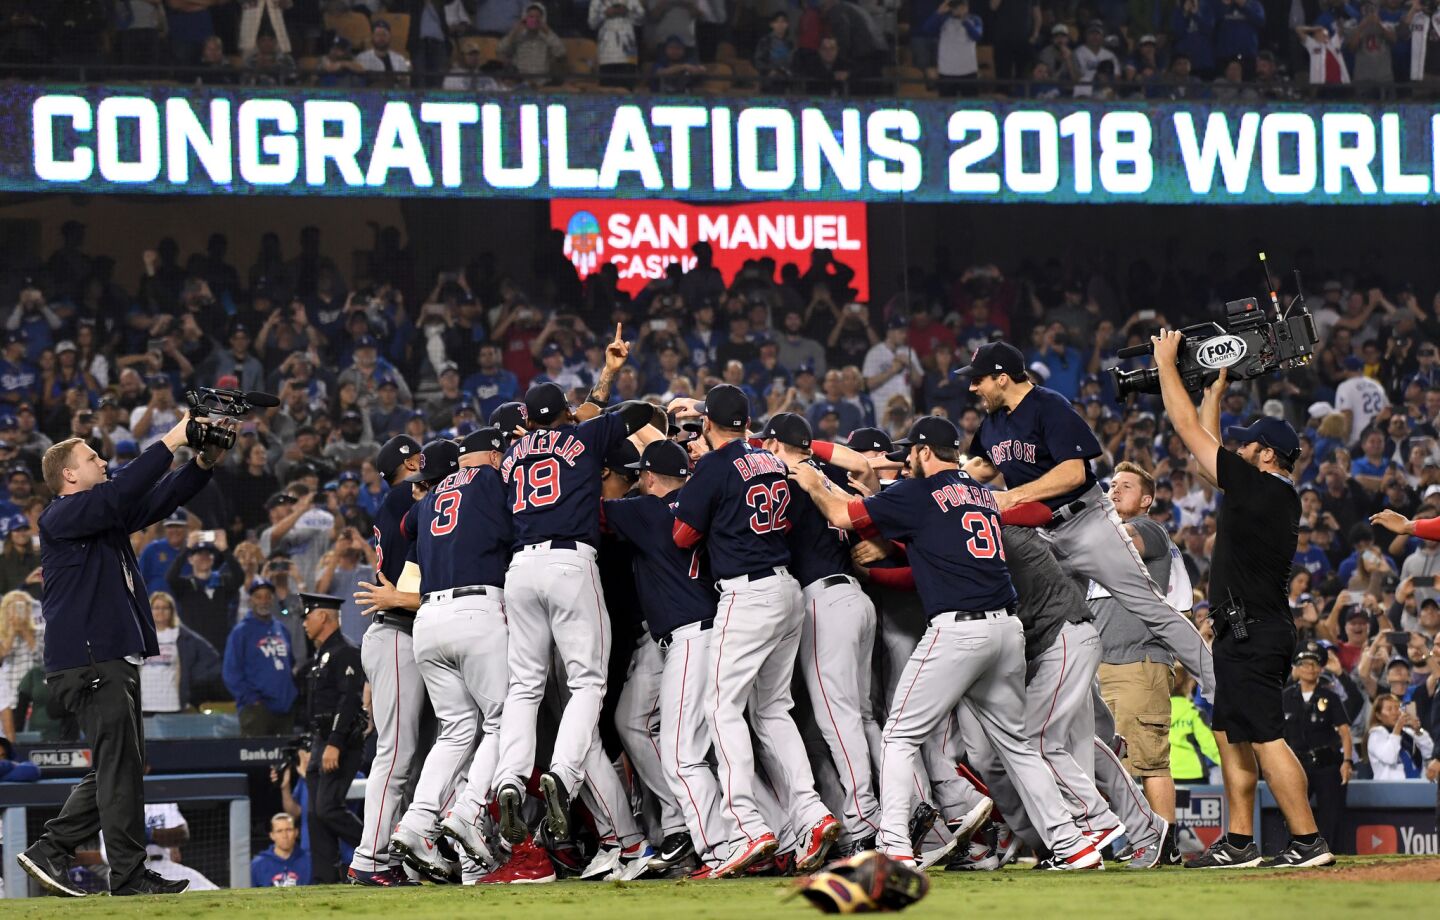 The Red Sox celebrate the championship after defeating the dodgers in Game 5 of the World Series.